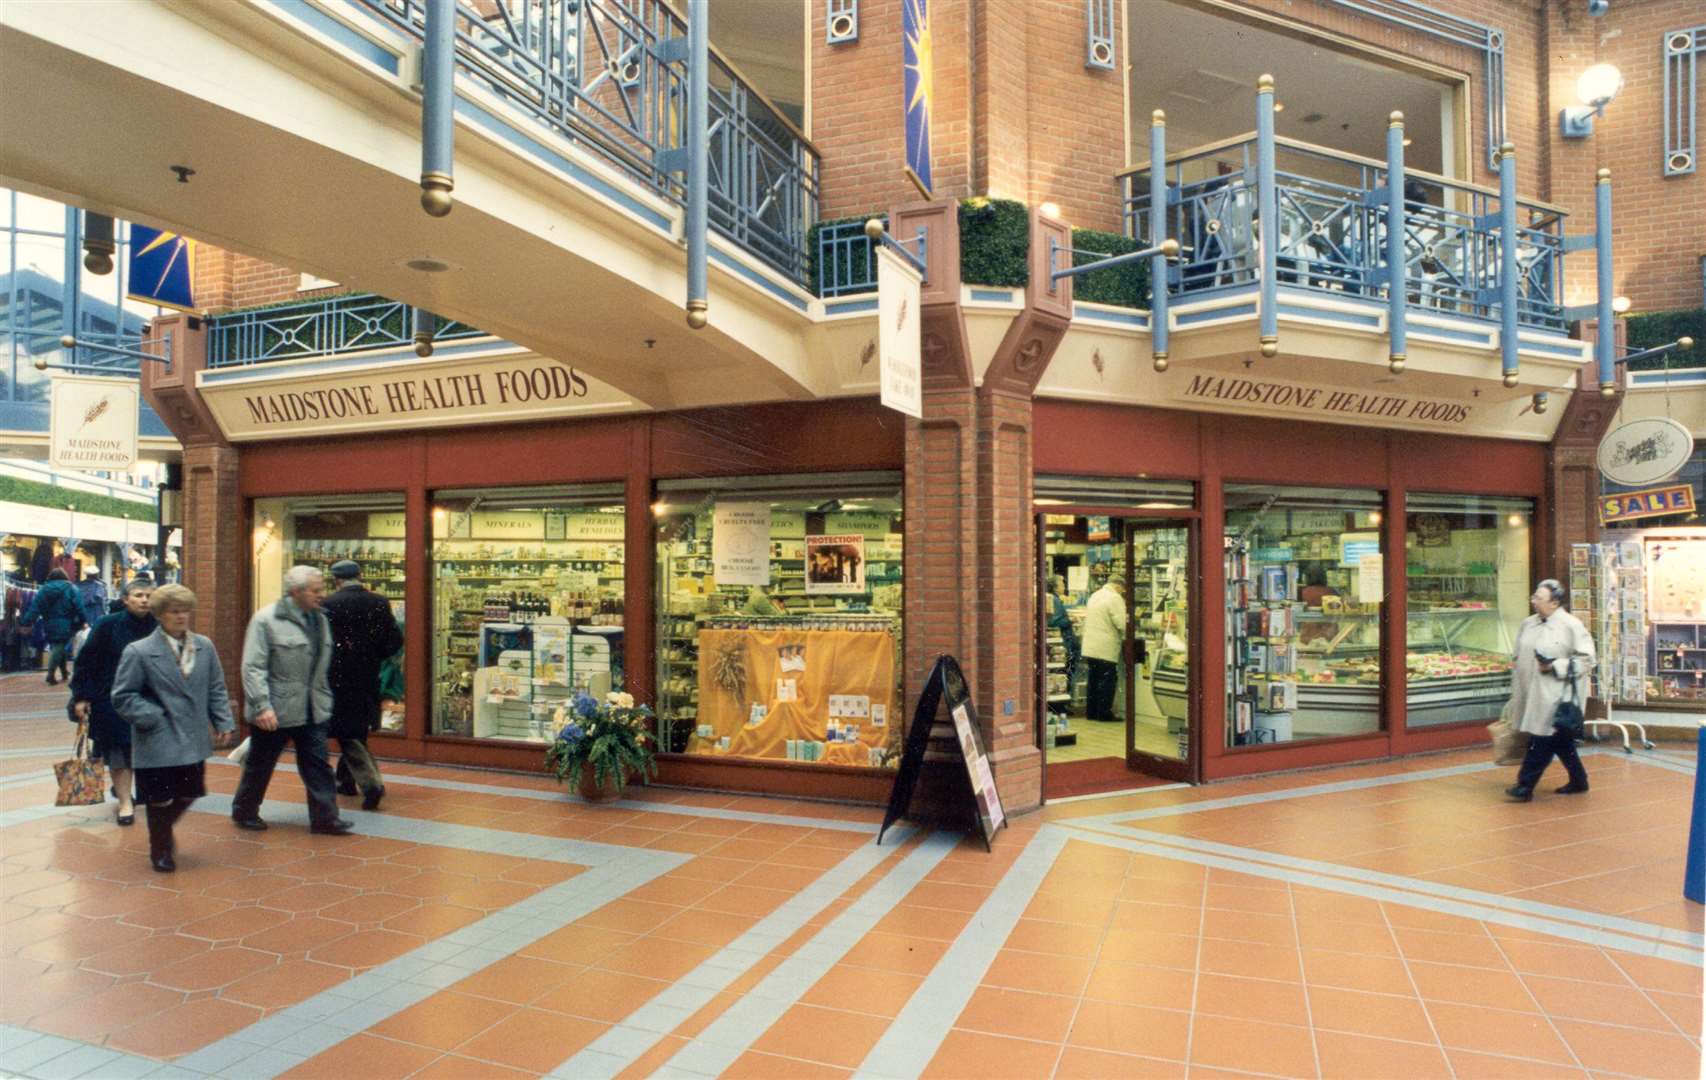 Inside the Royal Star Arcade in Maidstone in 1995. Once the home of Maidstone’s main hostelry, in 1989 the site was converted into an indoor shopping centre